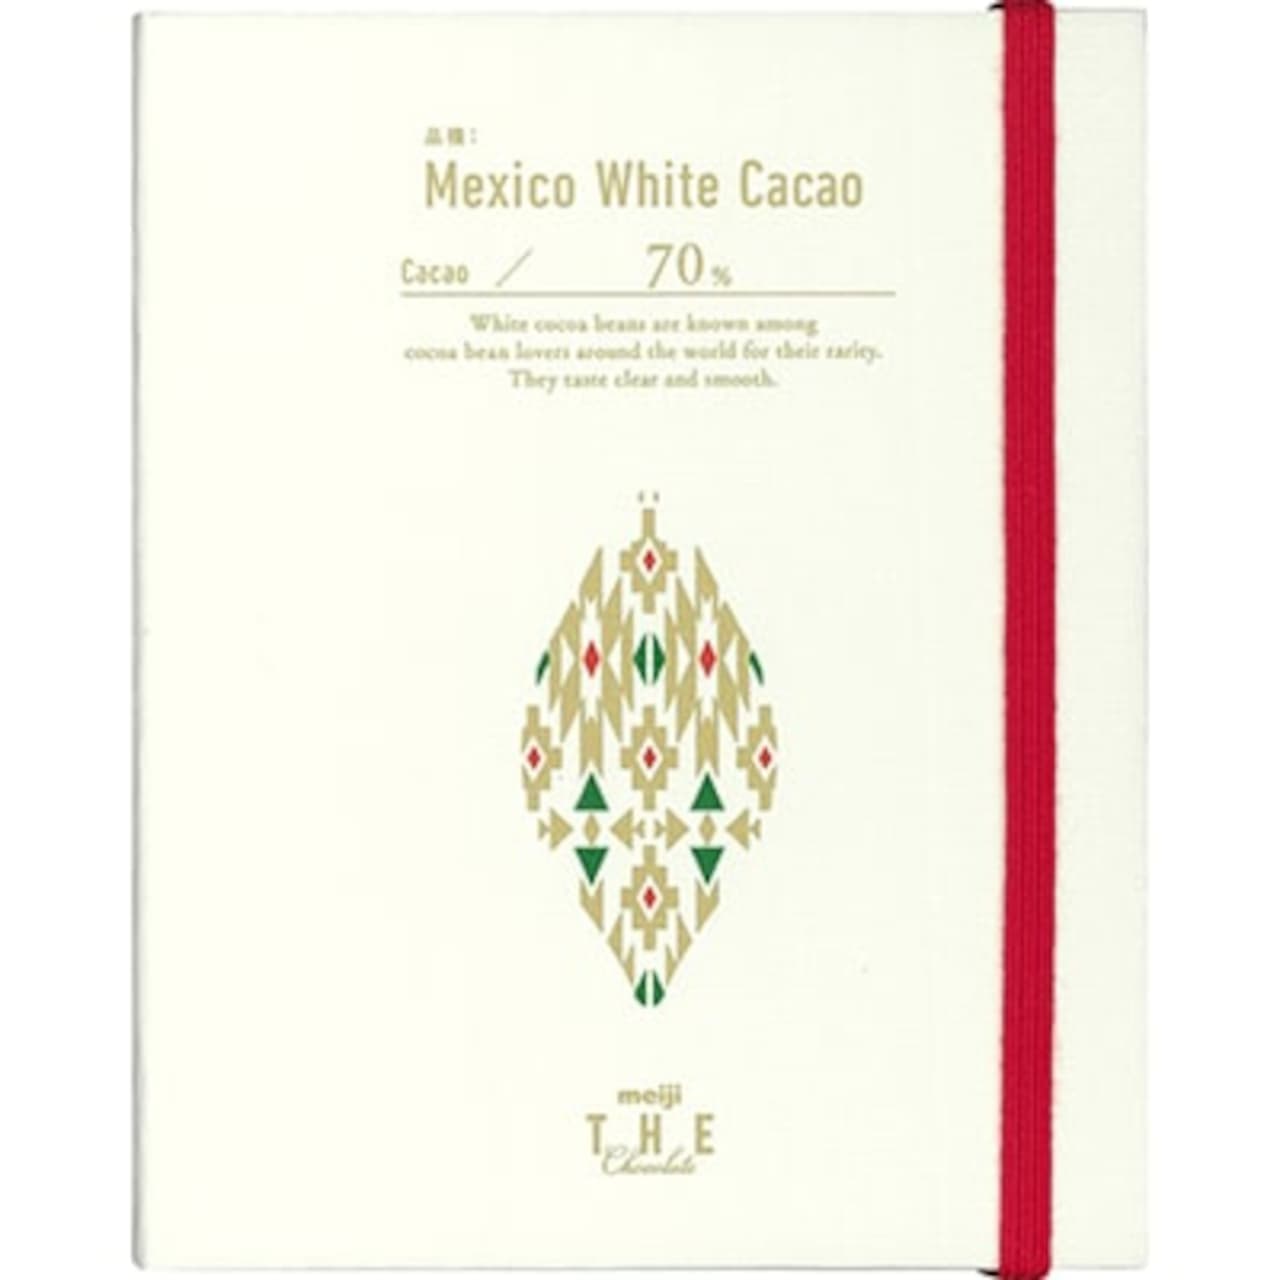 "Meiji The Chocolate Mexico White Cacao" and 3 other types